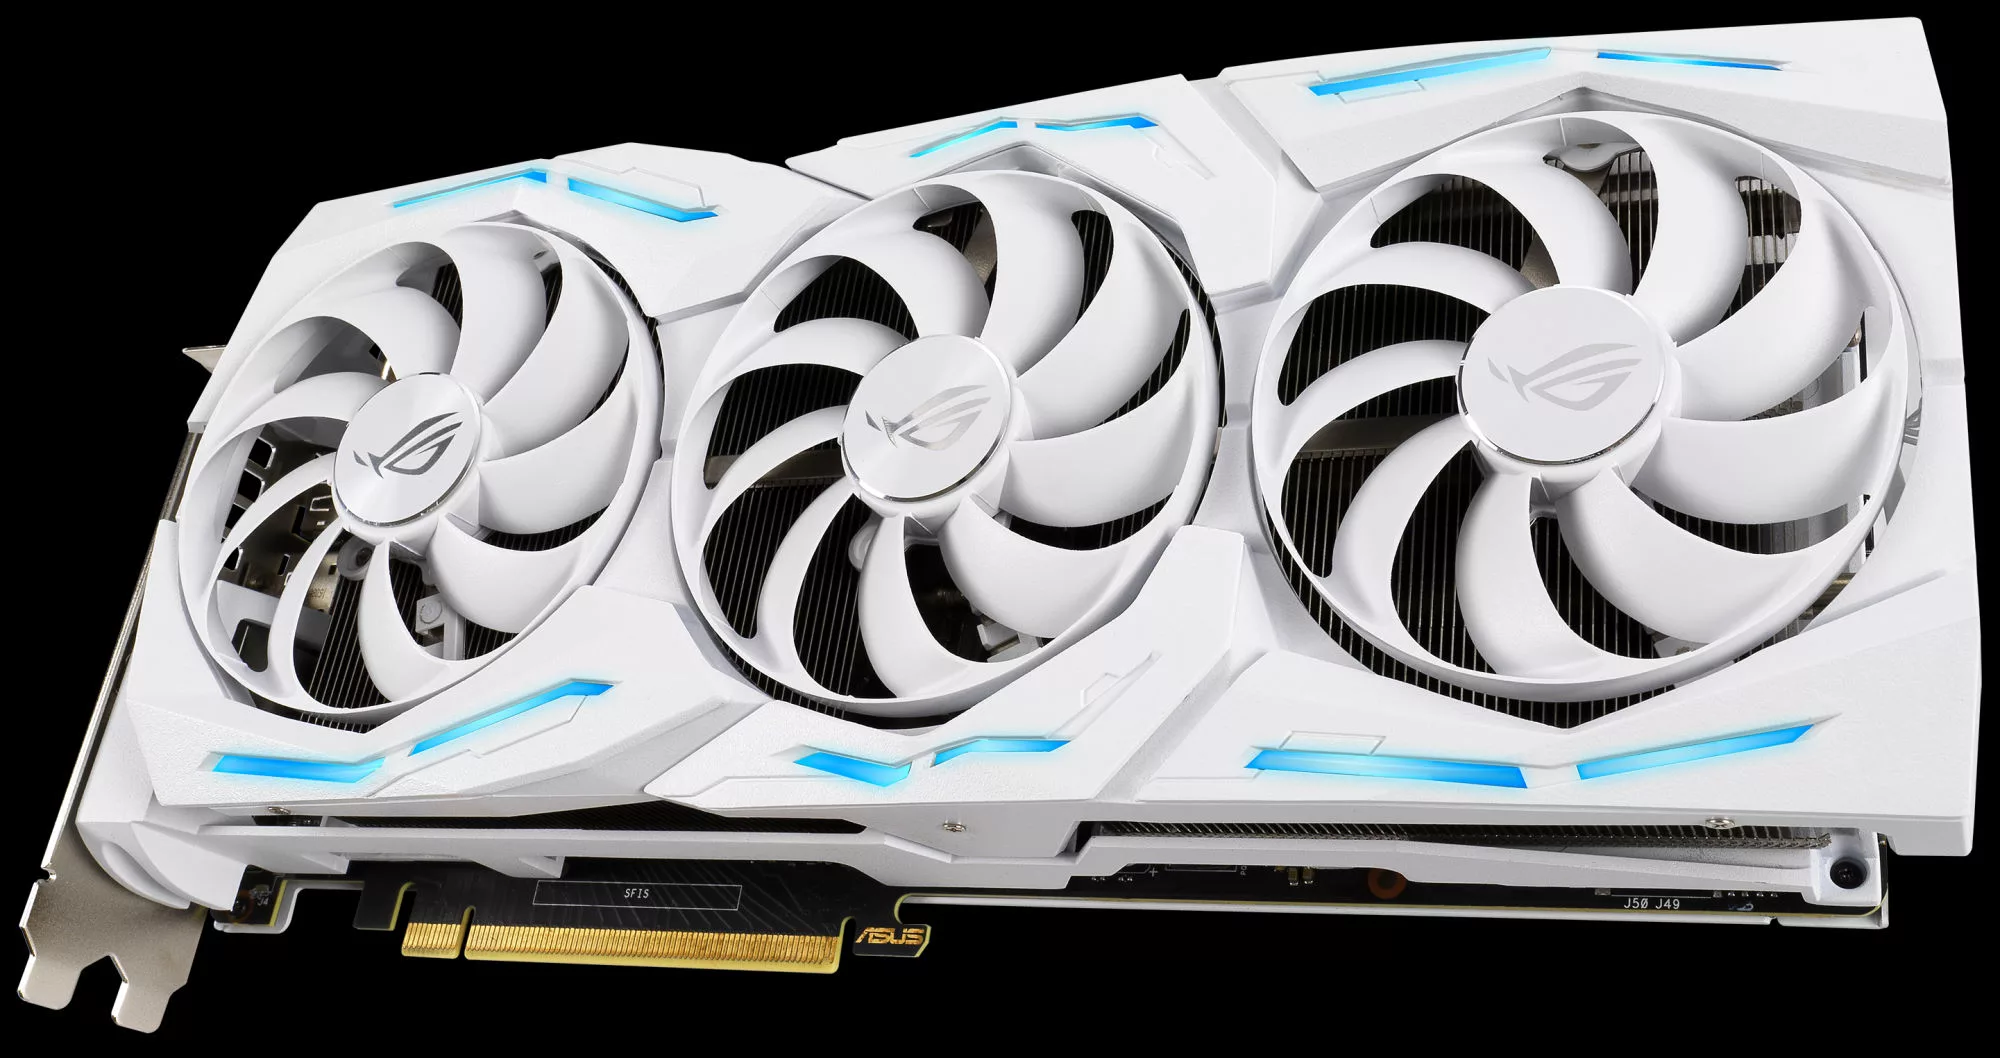 Fire and ice meet in the ROG Strix GeForce RTX 2080 Ti White Edition | ROG  - Republic of Gamers Global